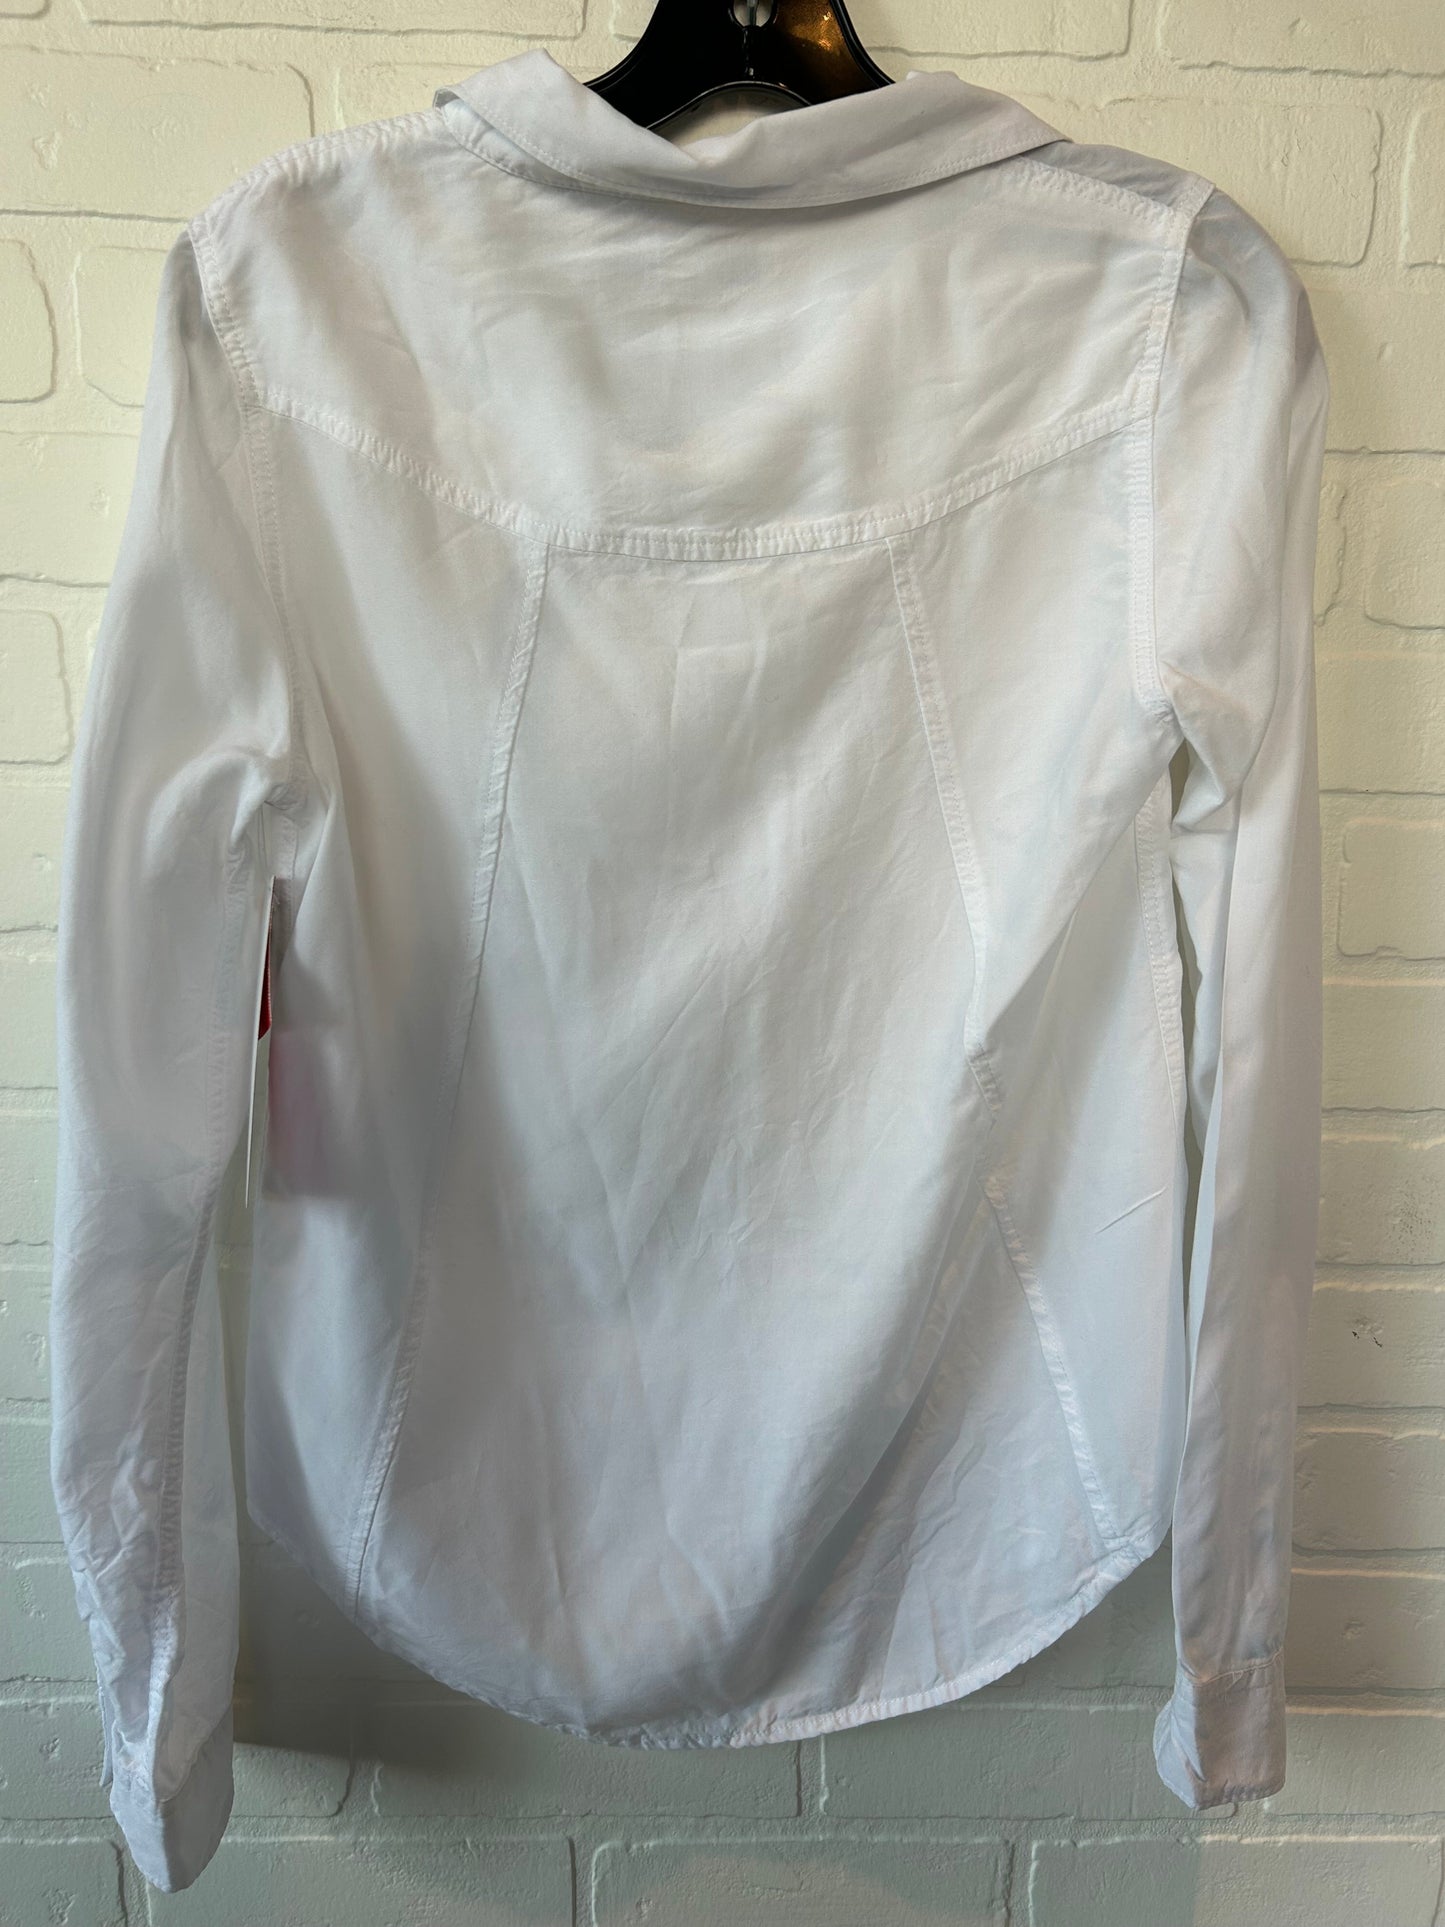 White Blouse Long Sleeve Thread And Supply, Size Xs